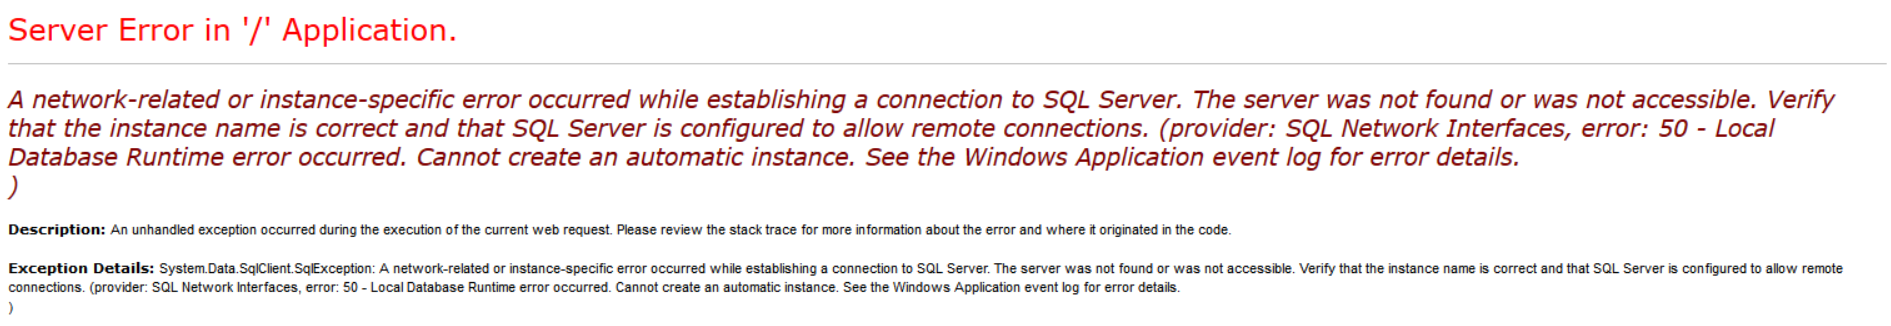 A network-related or instance-specific error occurred while establishing a connection to SQL Server